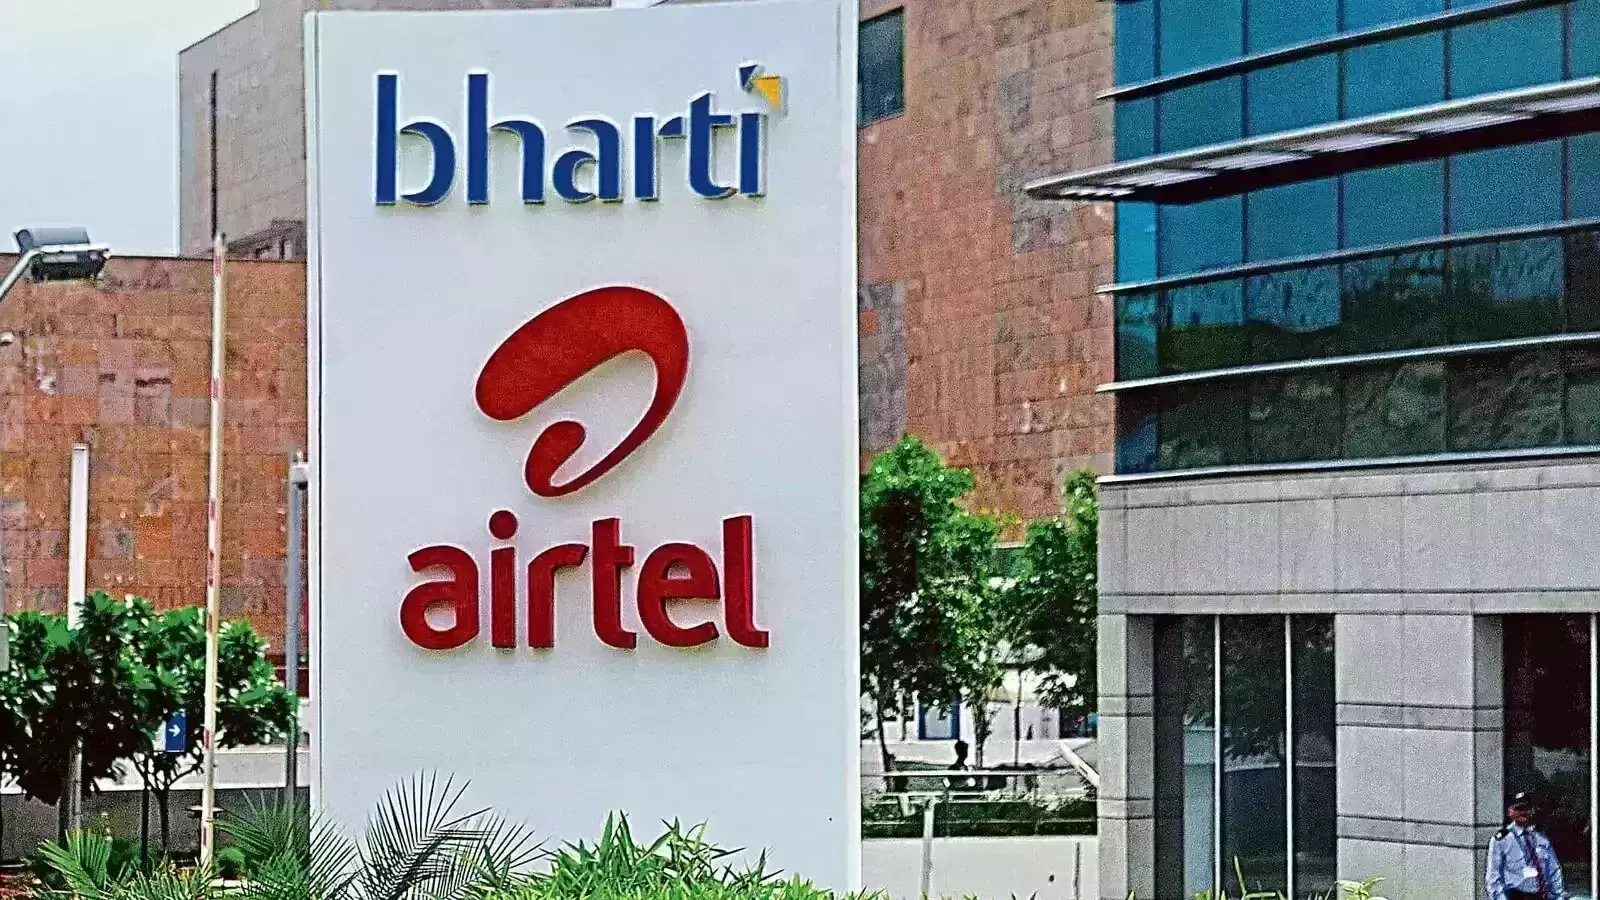 Airtel will be at the forefront of 5G connectivity in India, says chairman